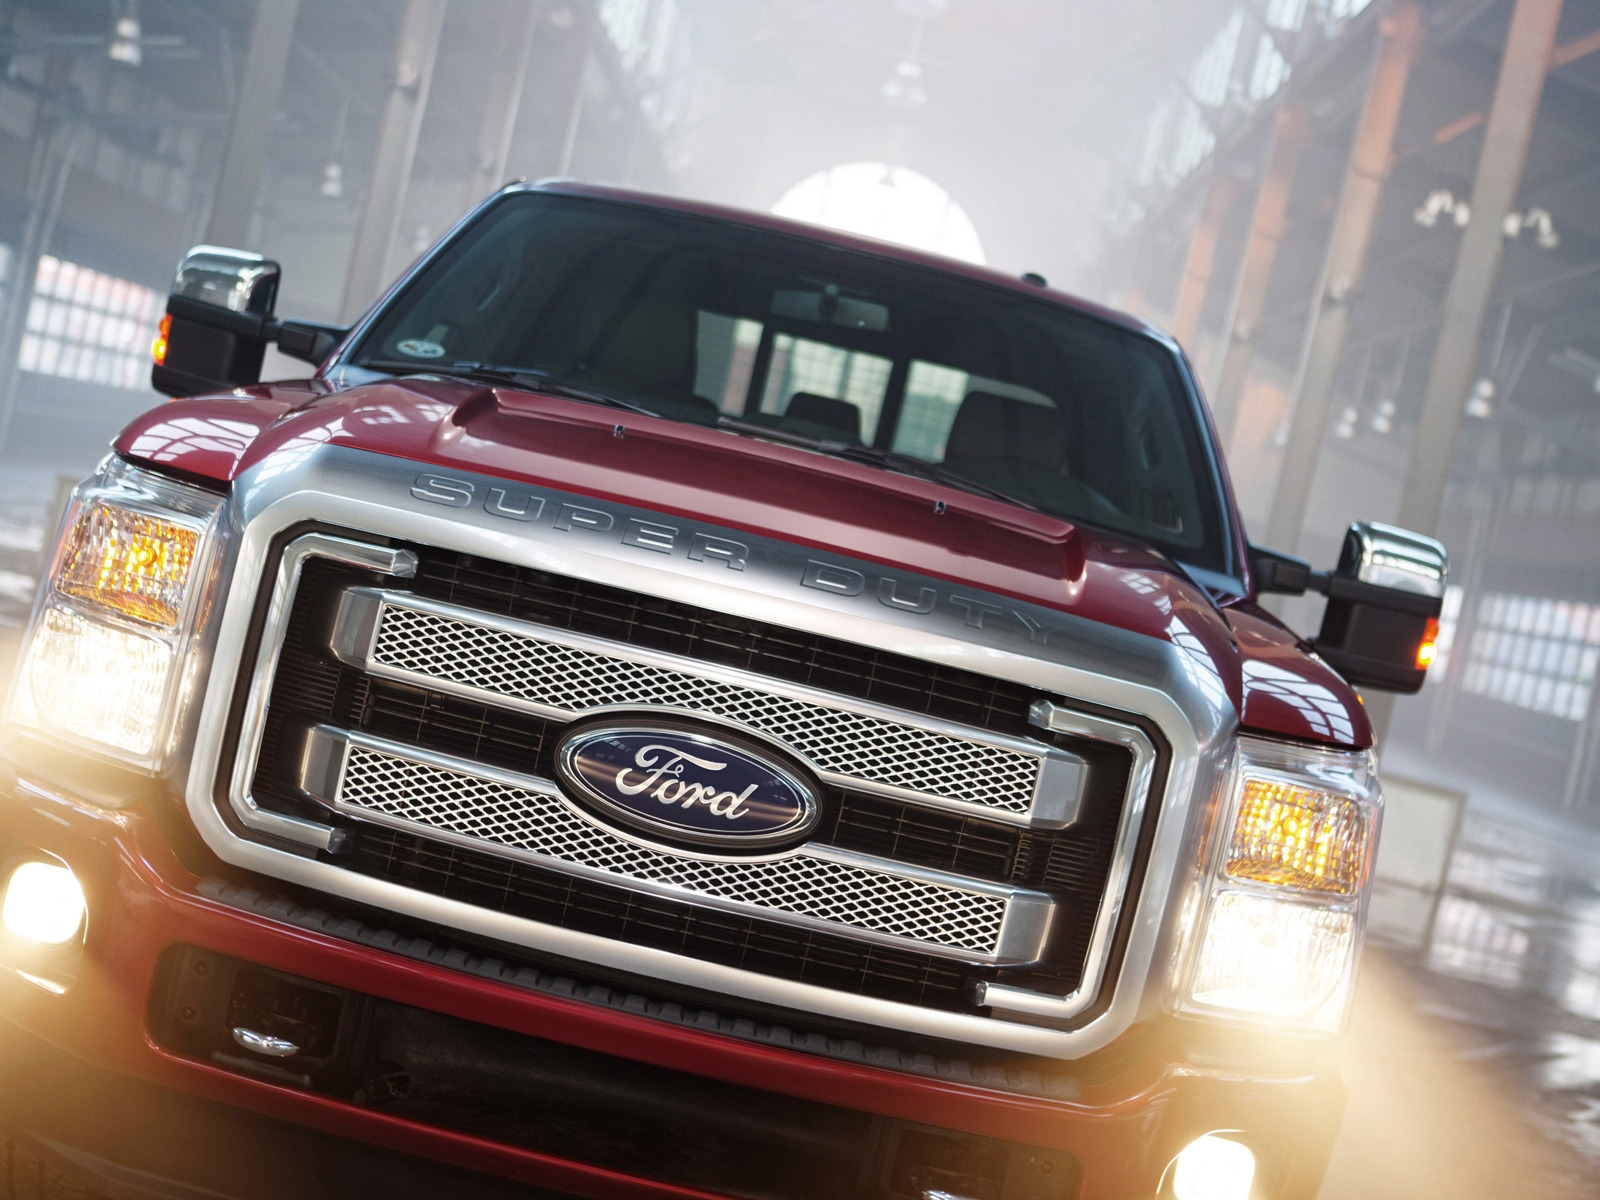 Ford Super Duty Platinum Front for 1600 x 1200 resolution